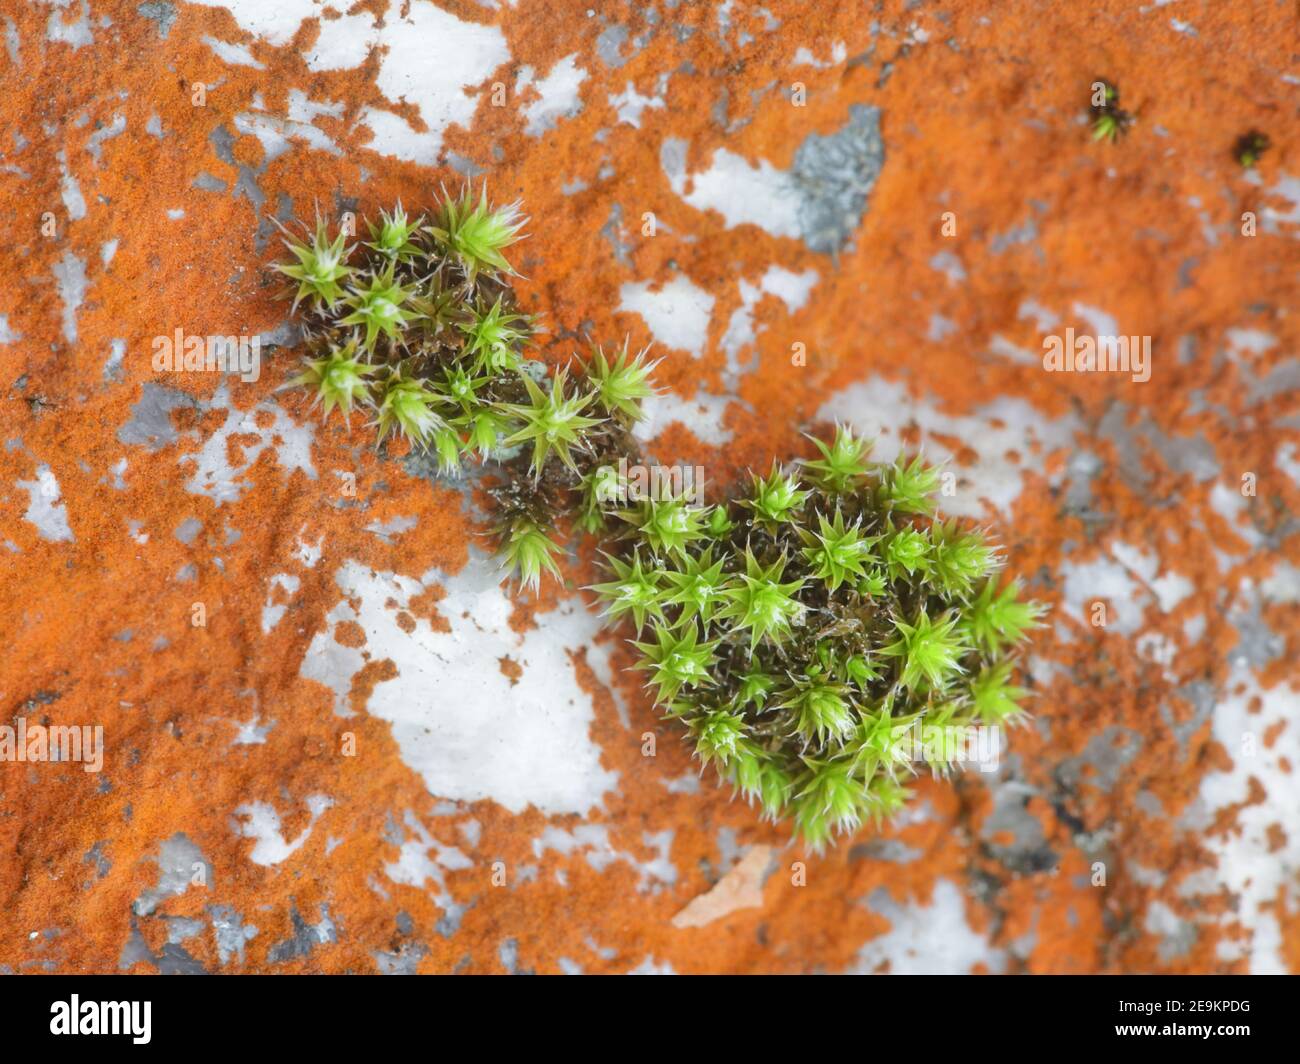 Orthotrichum rupestre, known as rock bristle-moss, and orange alga called Trentepohlia aurea, growing on rock surface in Finland Stock Photo